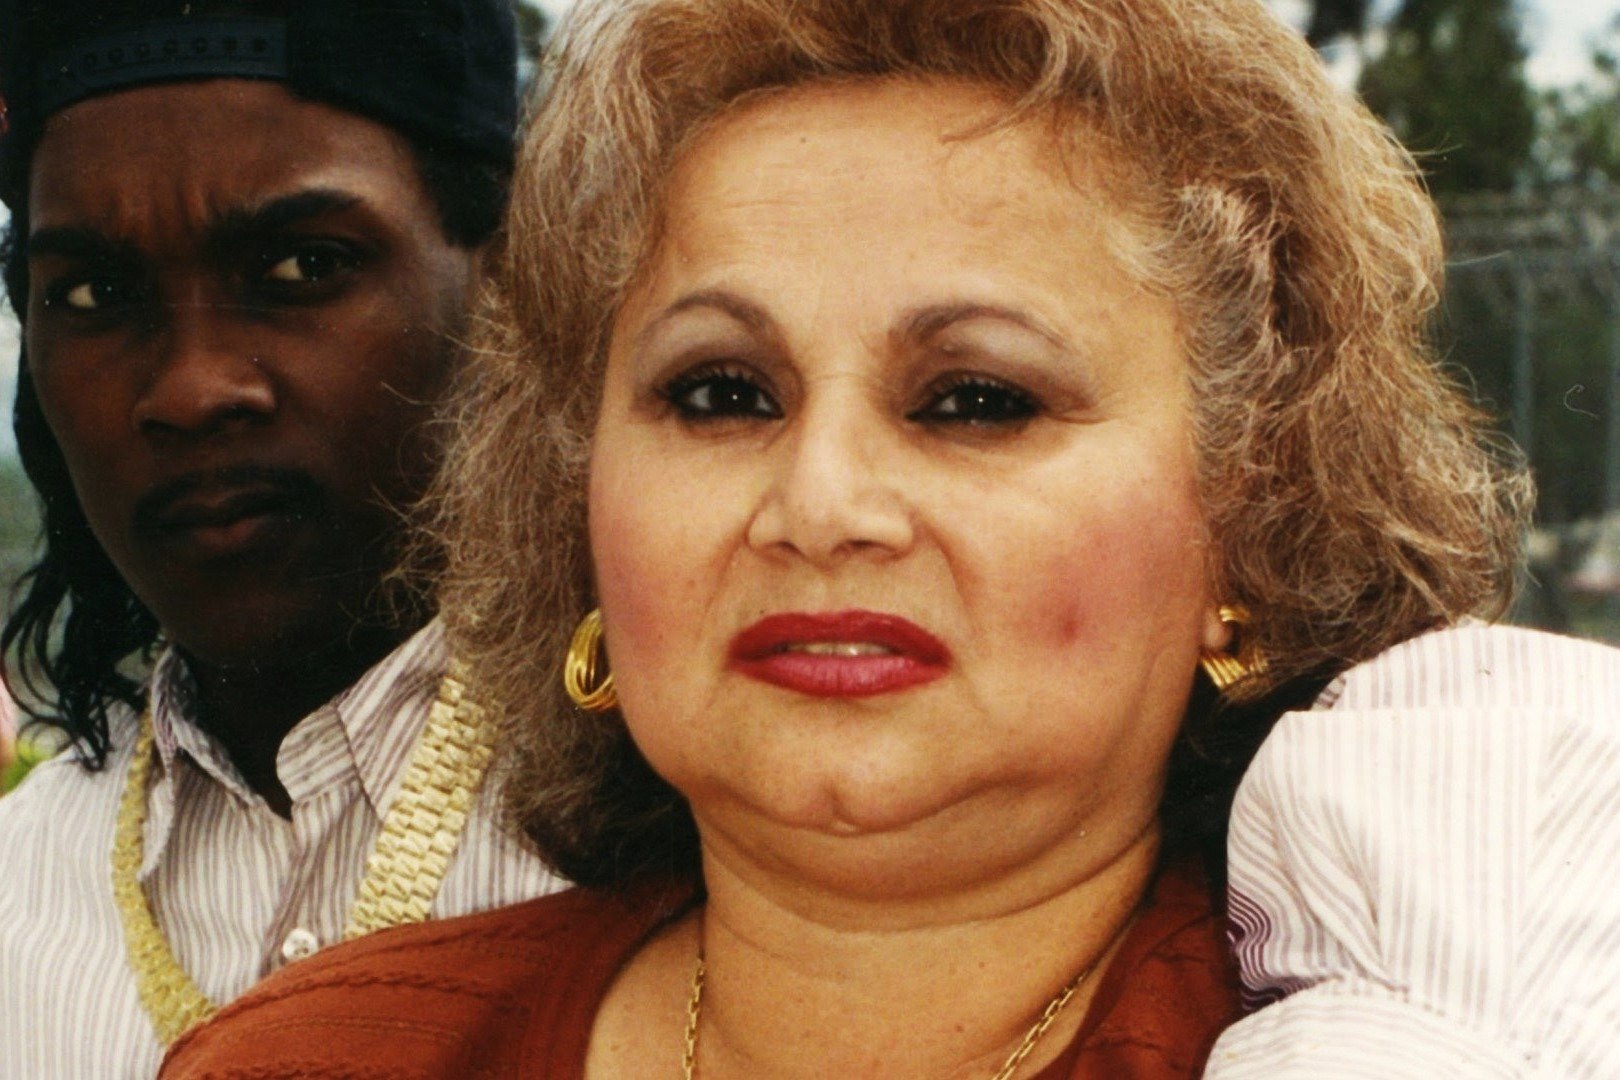 12 Surprising Facts About Griselda Blanco - Facts.net